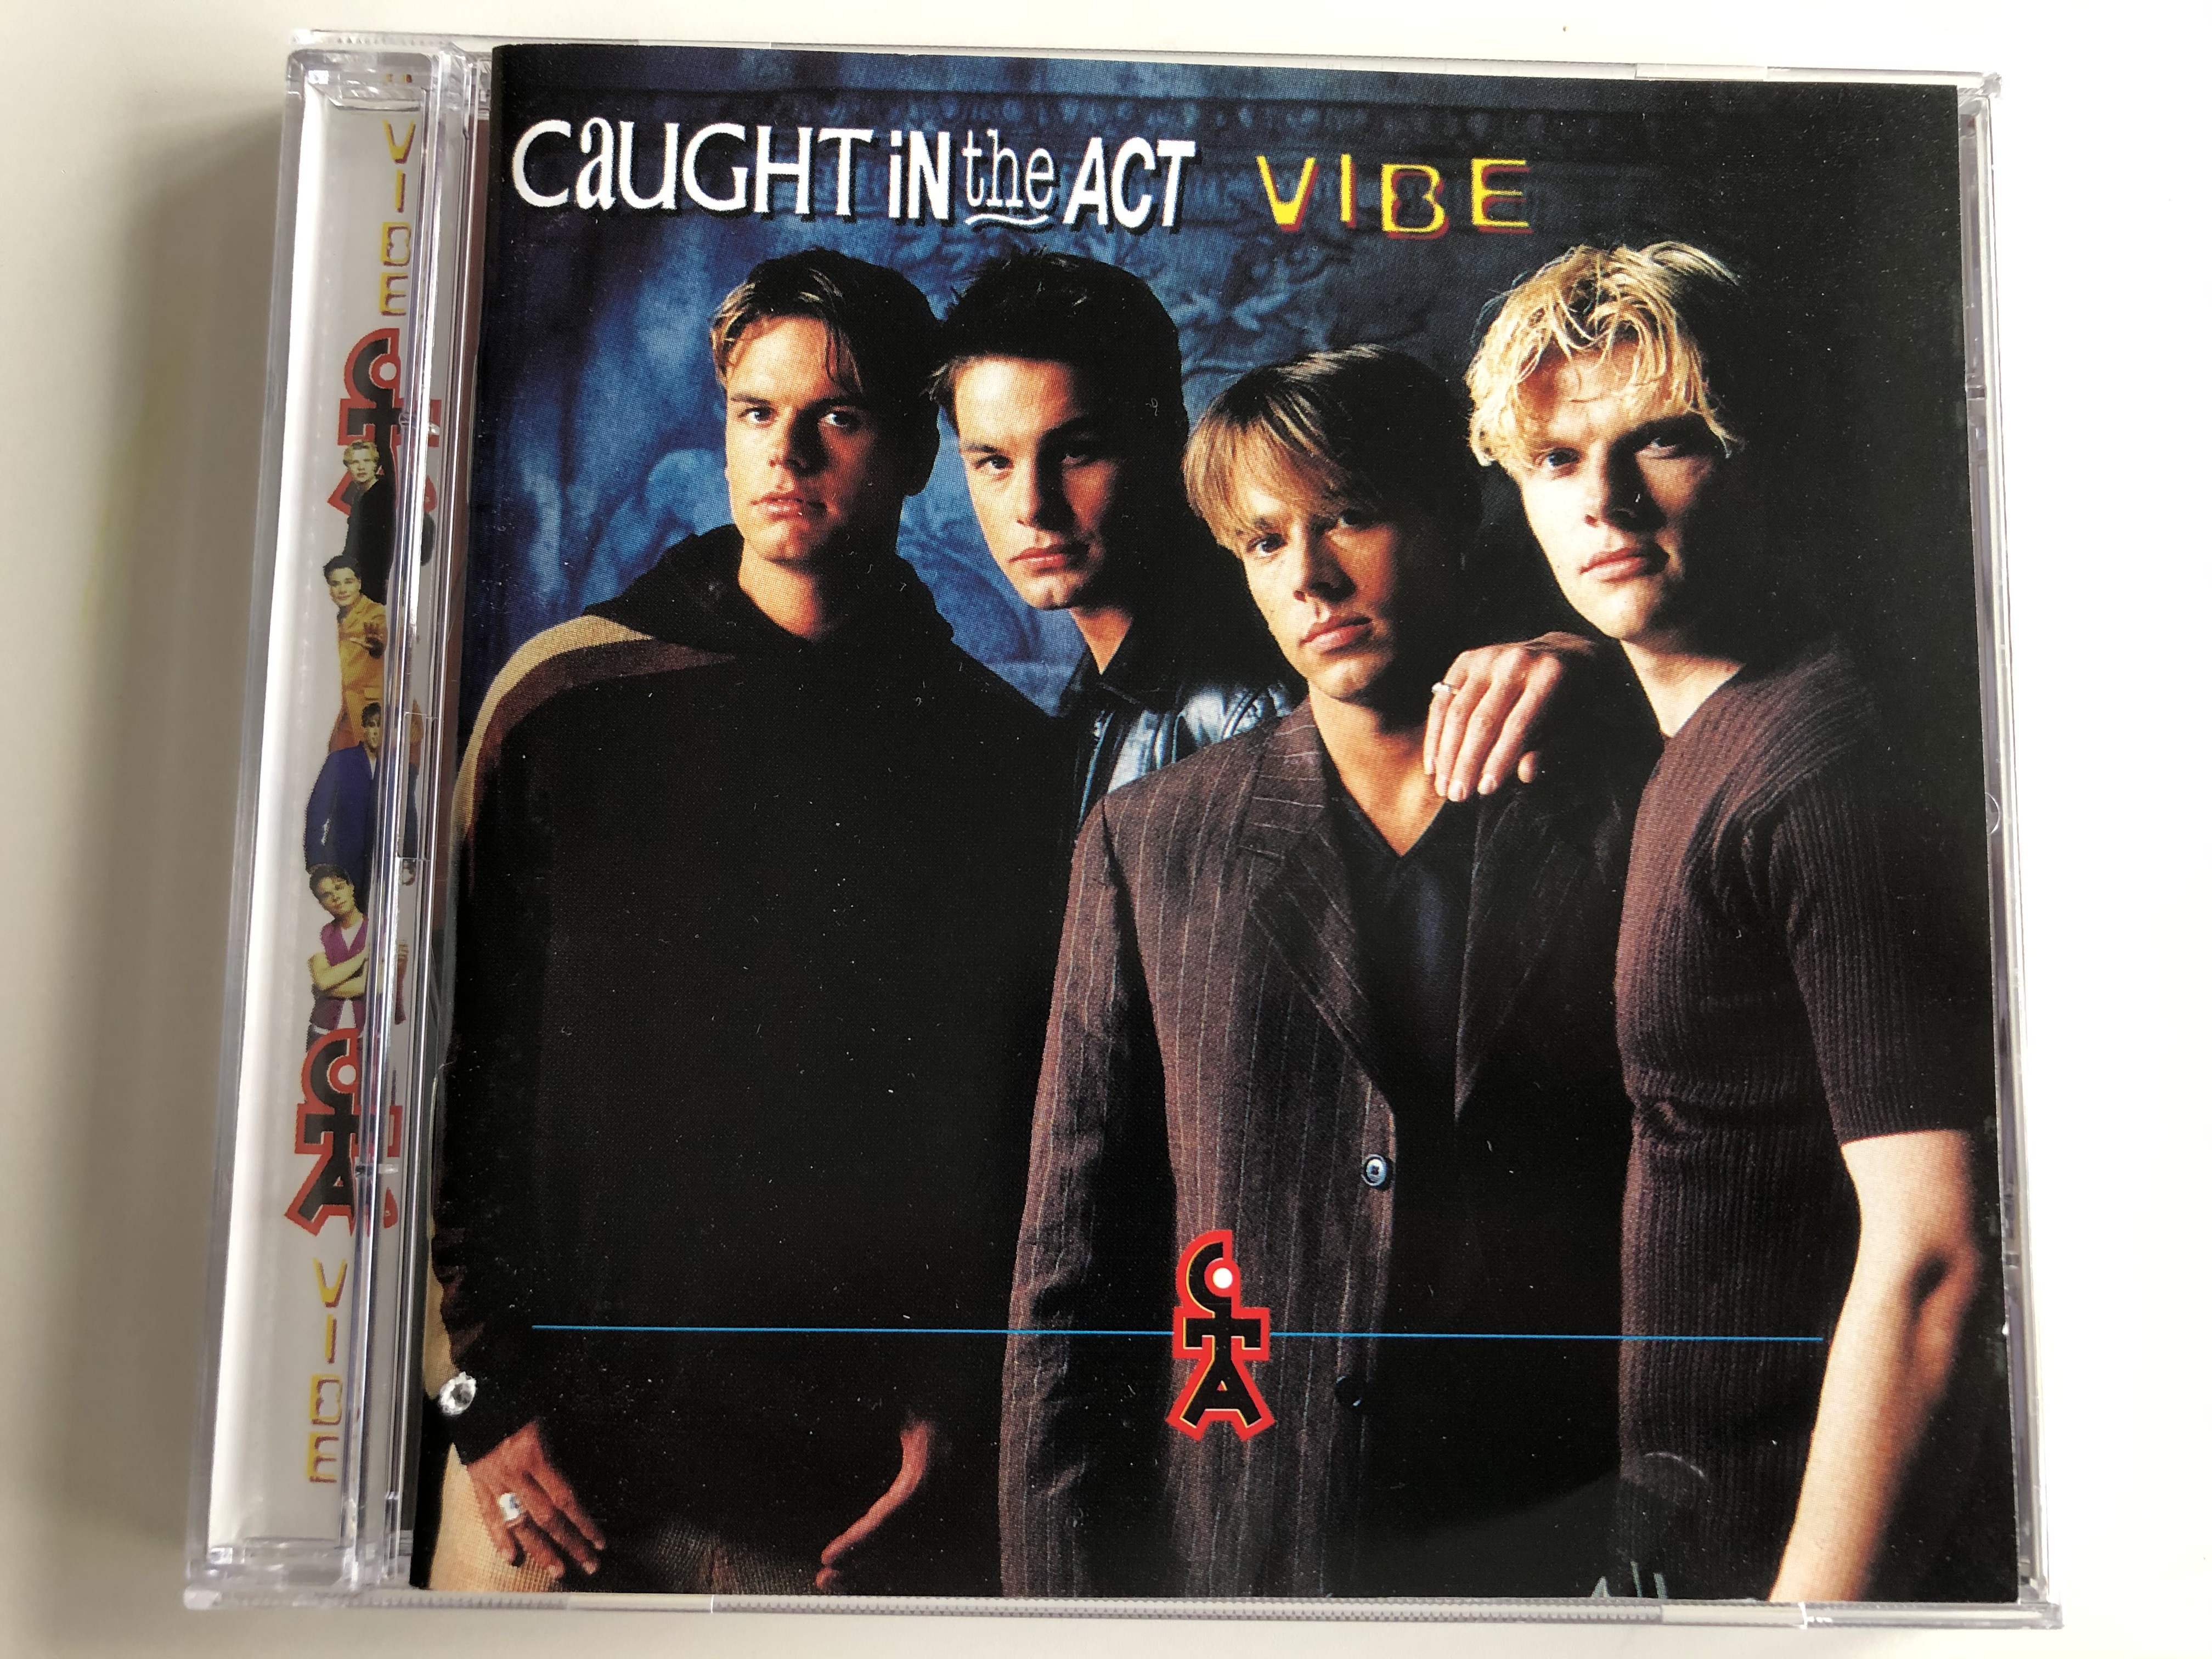 caught-in-the-act-vibe-zyx-music-audio-cd-1997-zyx-20450-2-1-.jpg